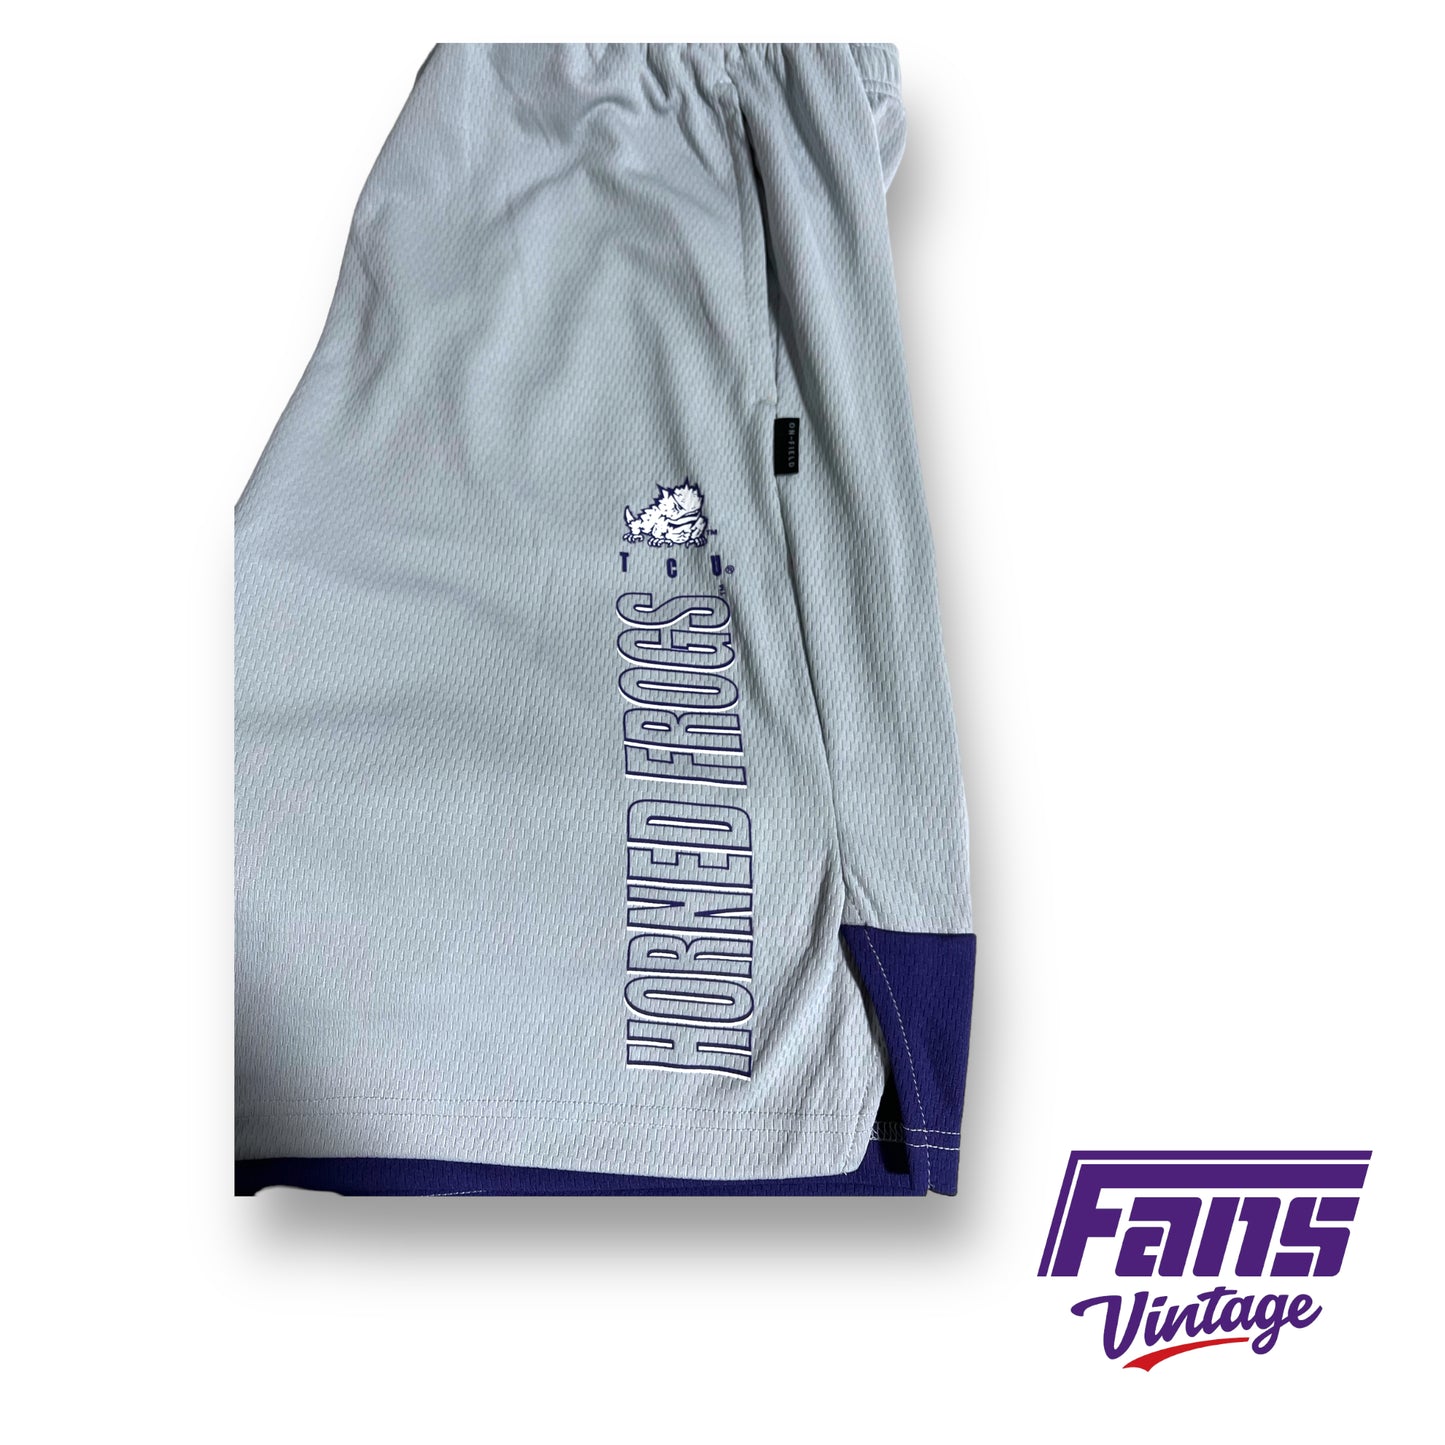 Nike TCU Horned Frogs team issued shorts